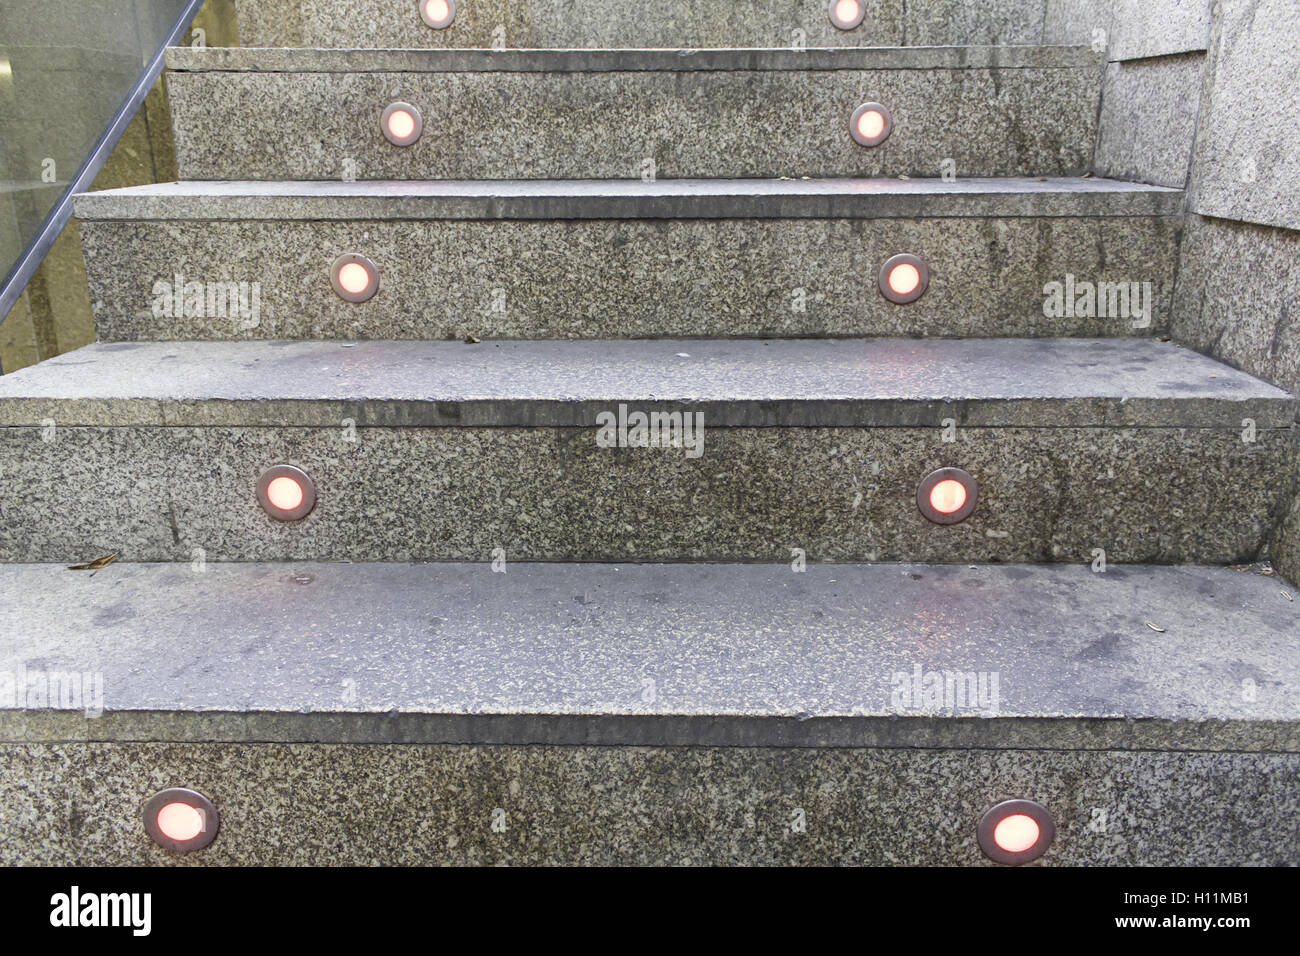 Stairs with lights in urban building Stock Photo